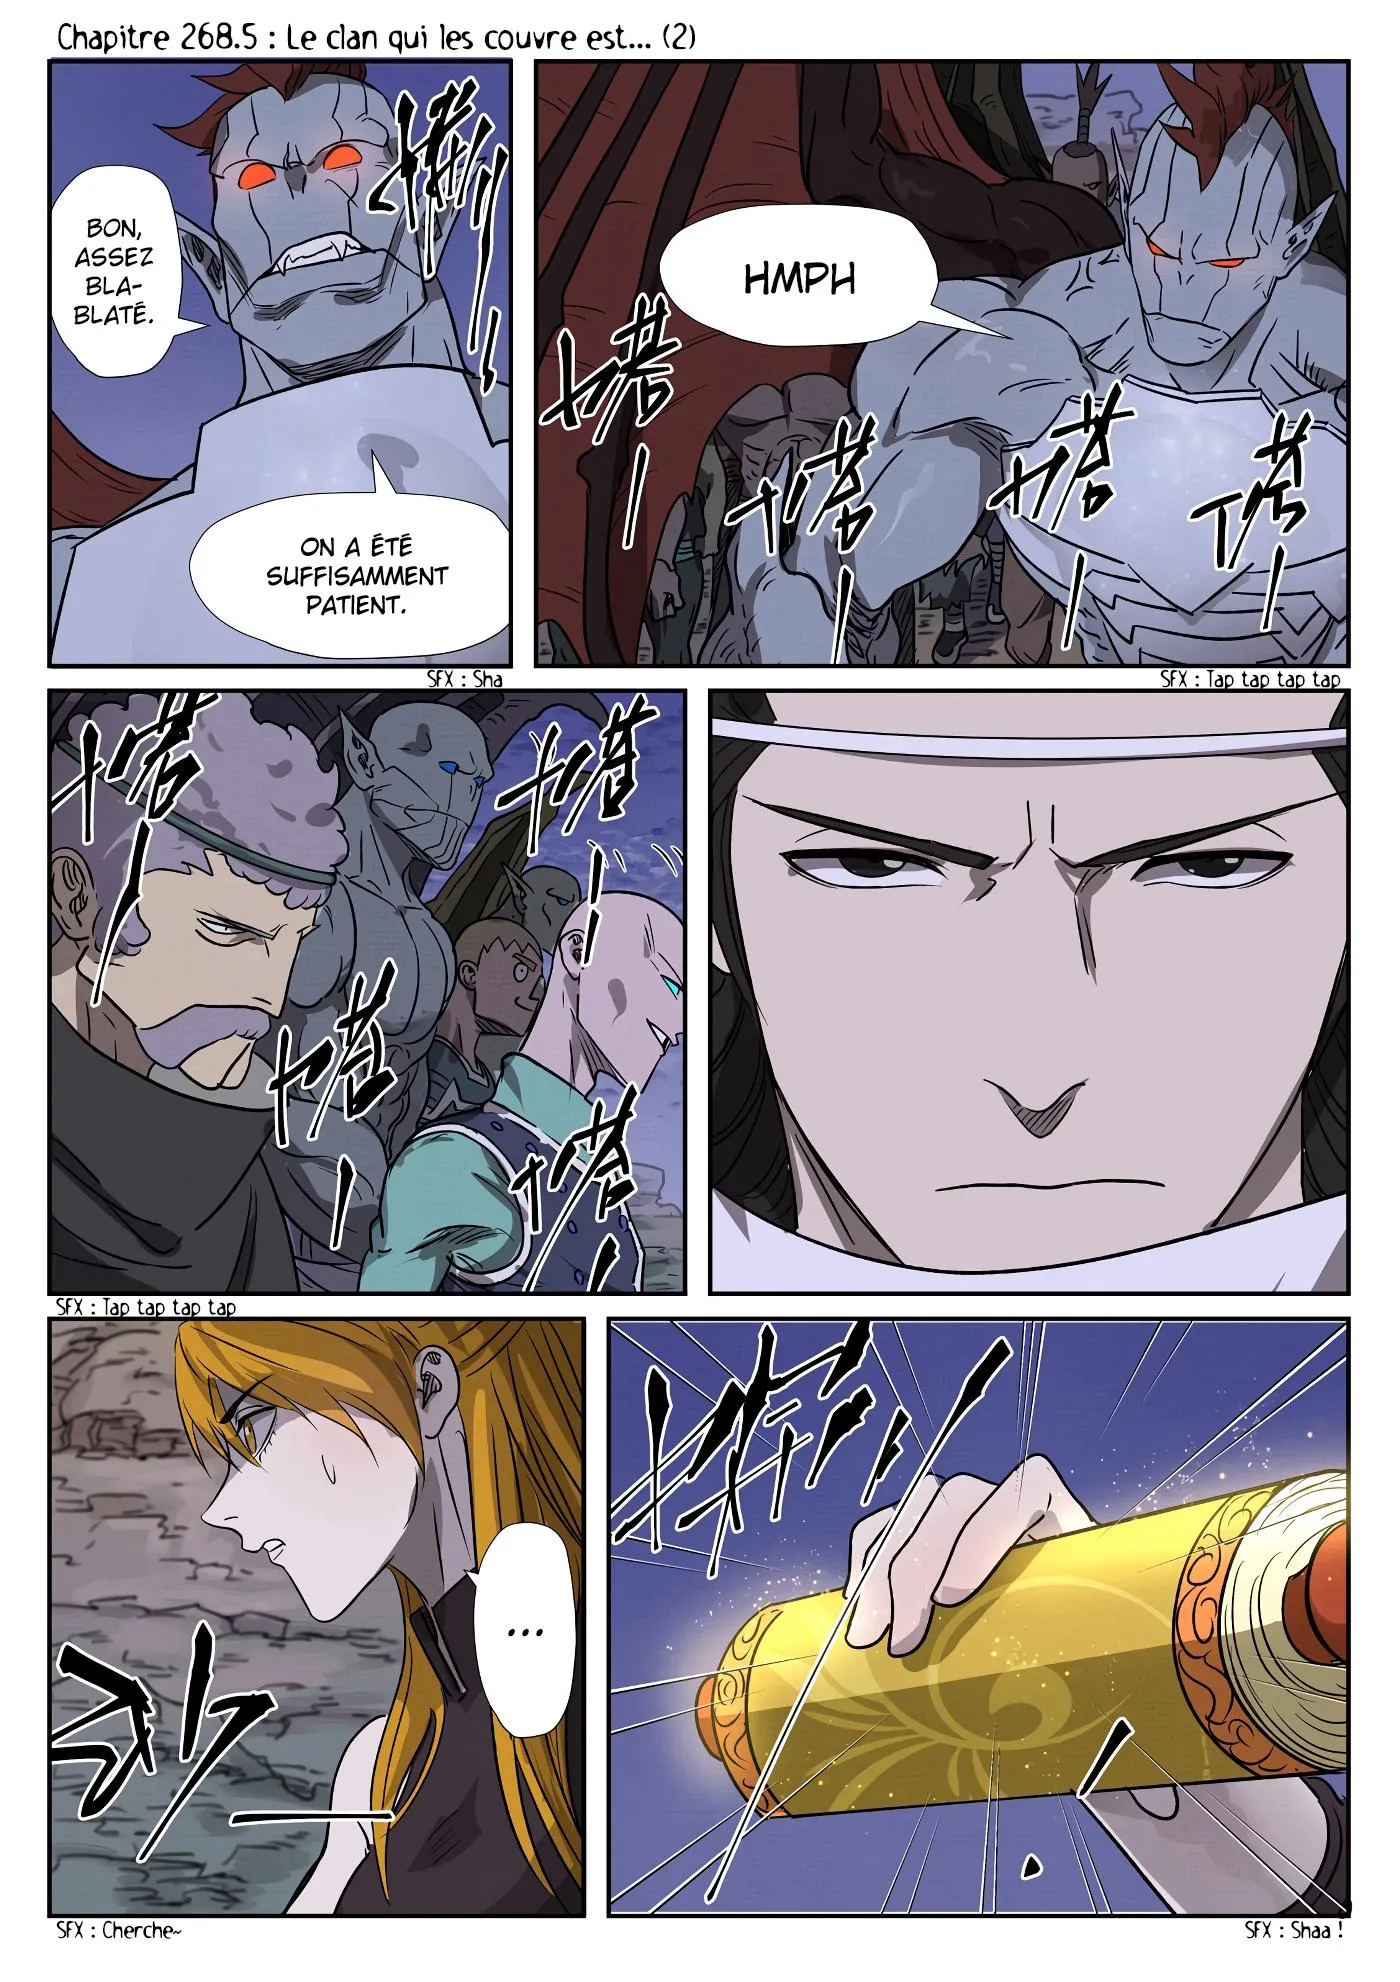 Tales Of Demons And Gods: Chapter chapitre-268.5 - Page 2